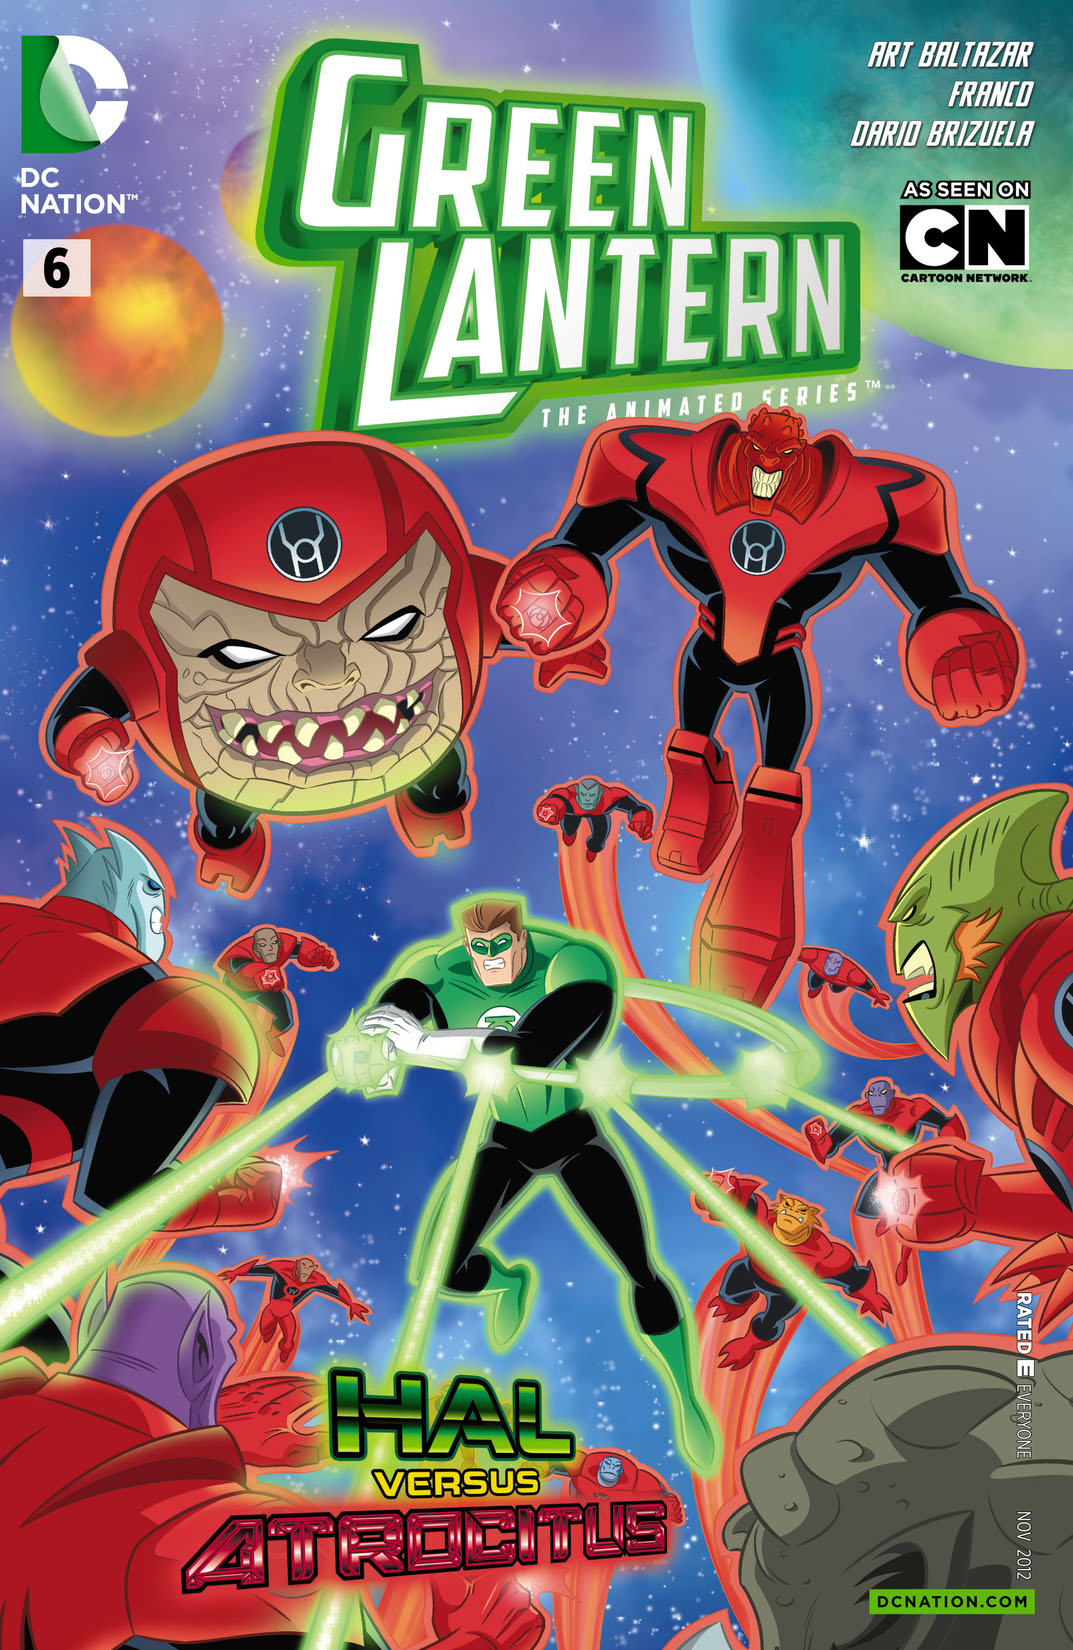 Green Lantern: The Animated Series #6 preview images